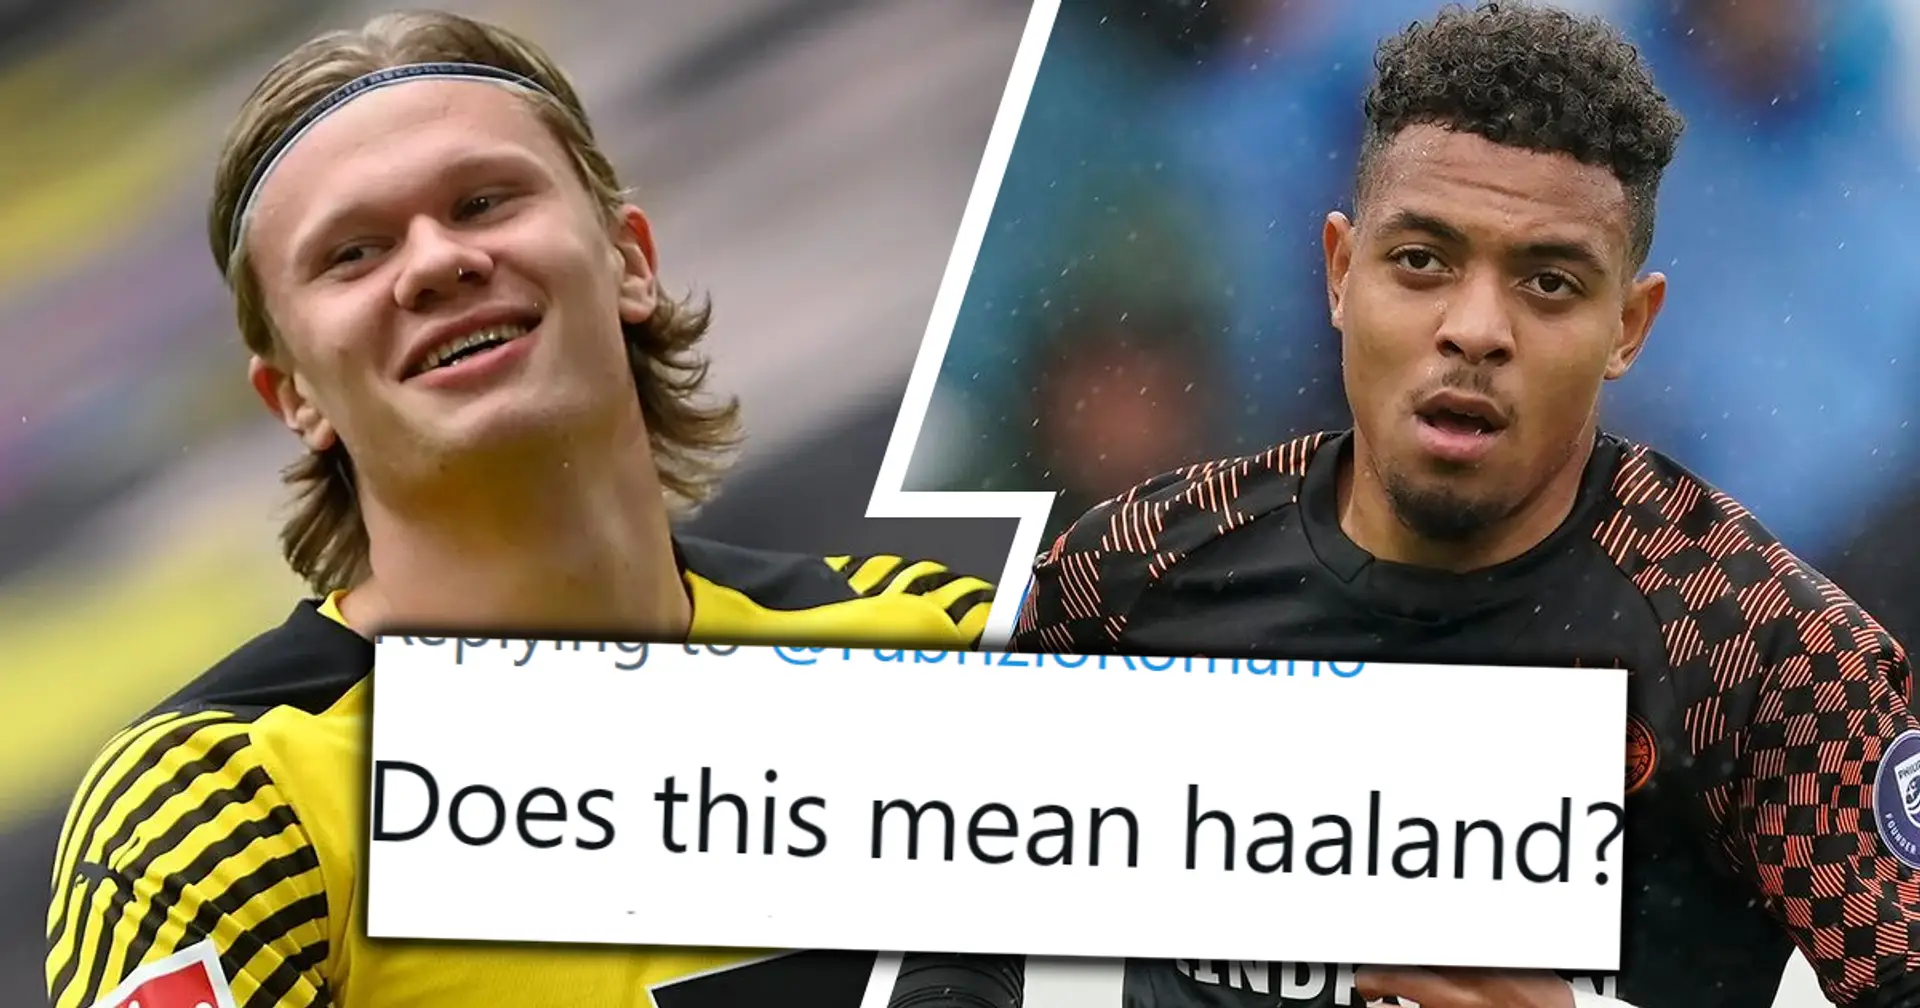 'Preparing for Haaland departure?': Chelsea fans speculate as Romano confirms Malen's Dortmund move